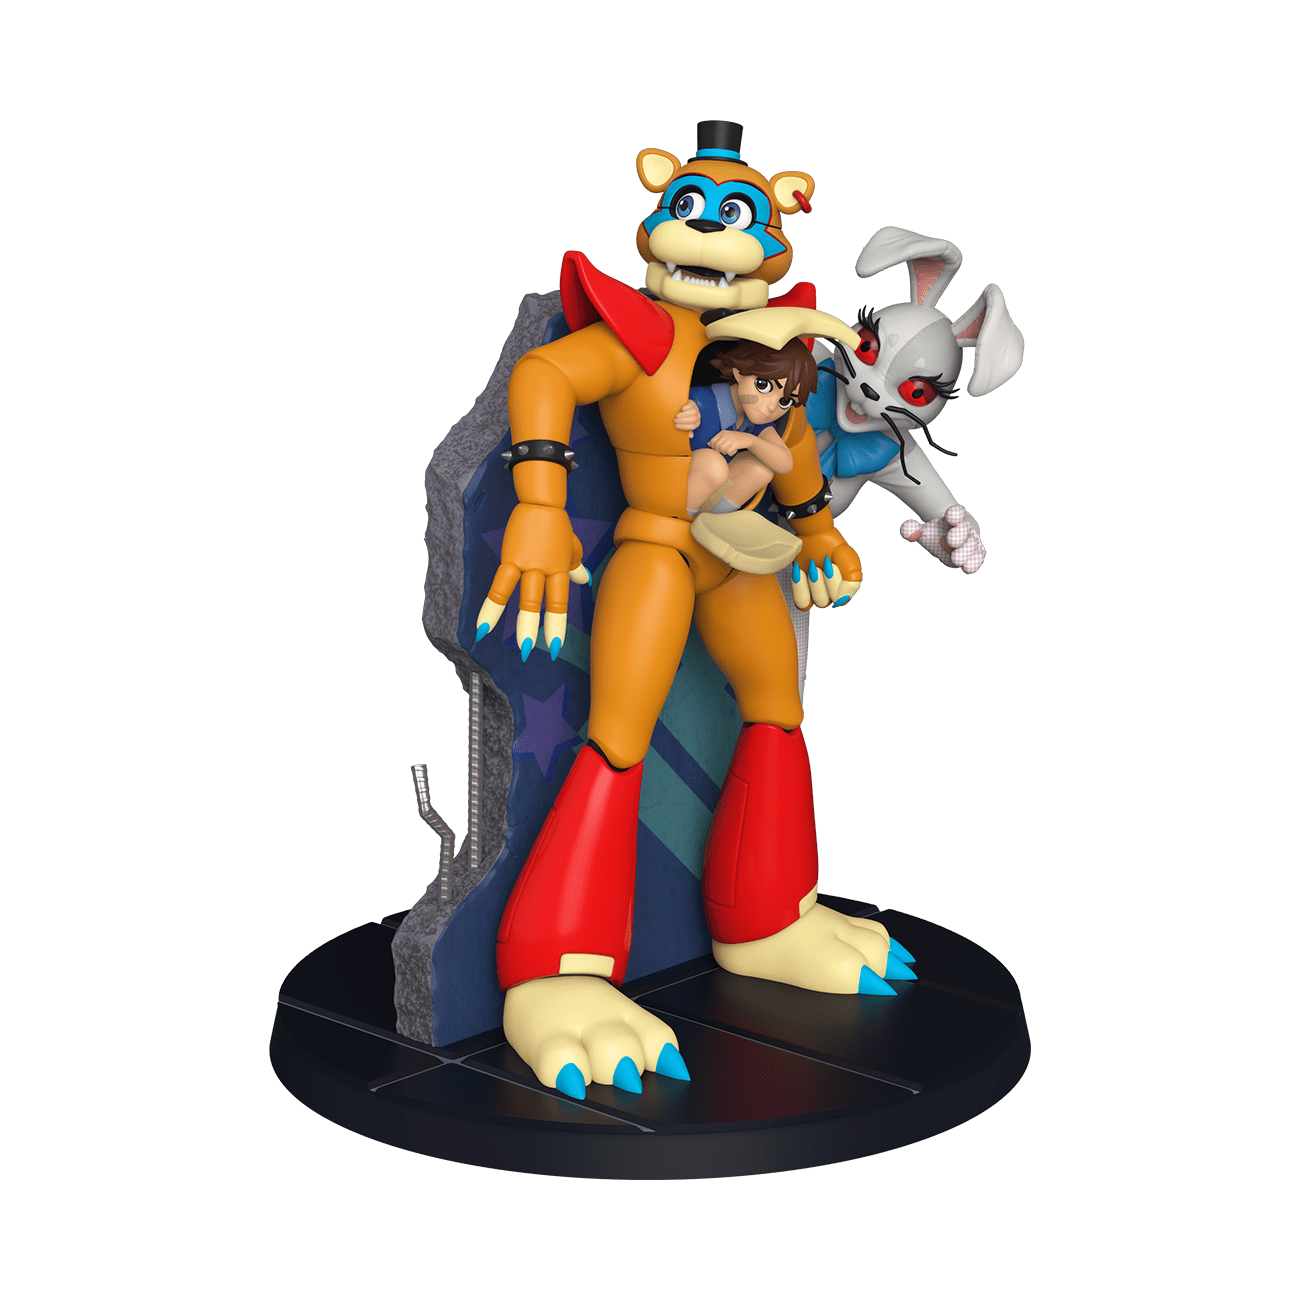 Funko 12 Statue: Five Nights at Freddy's - Freddy and Gregory